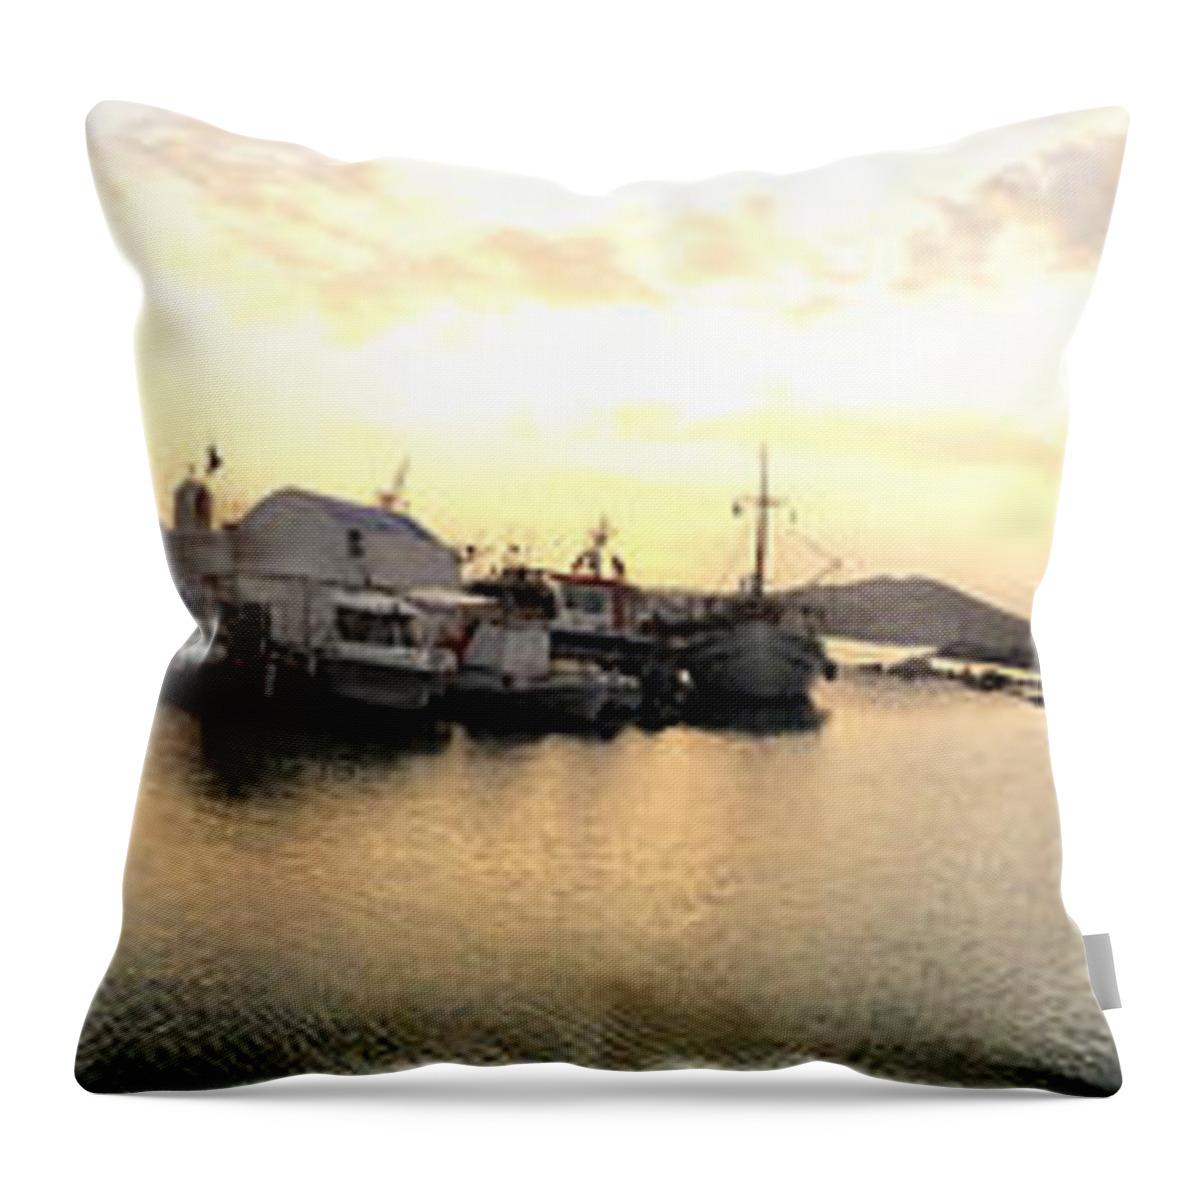 Colette Throw Pillow featuring the photograph Naoussa By Night Paros Island by Colette V Hera Guggenheim